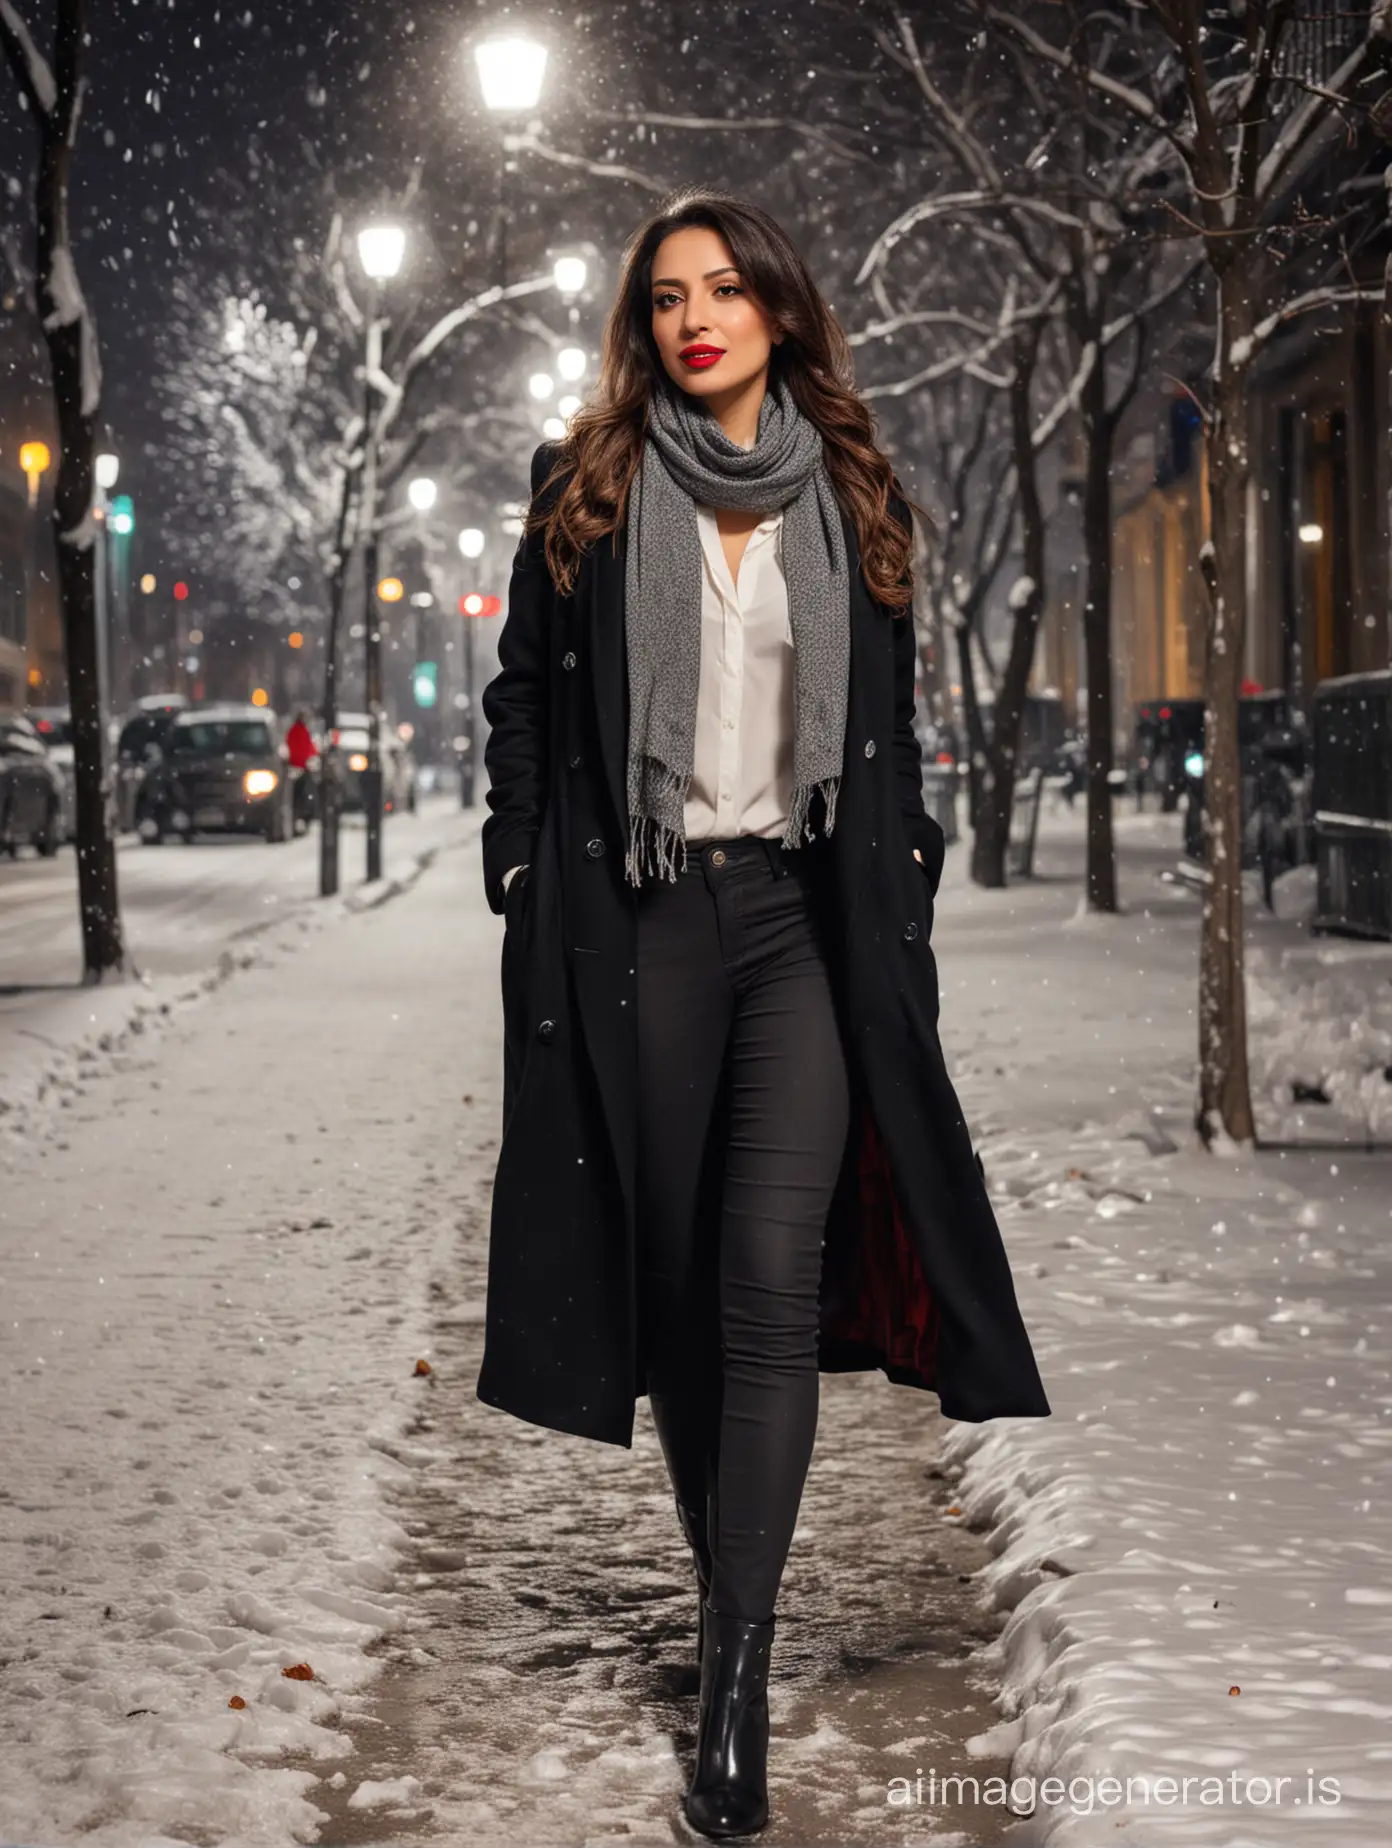 Iranian woman 40 years old, long black coat, grey pants, cream shirt, red lip sticks, black boots, white scarf, in a snowy street at night, dramatic lighting